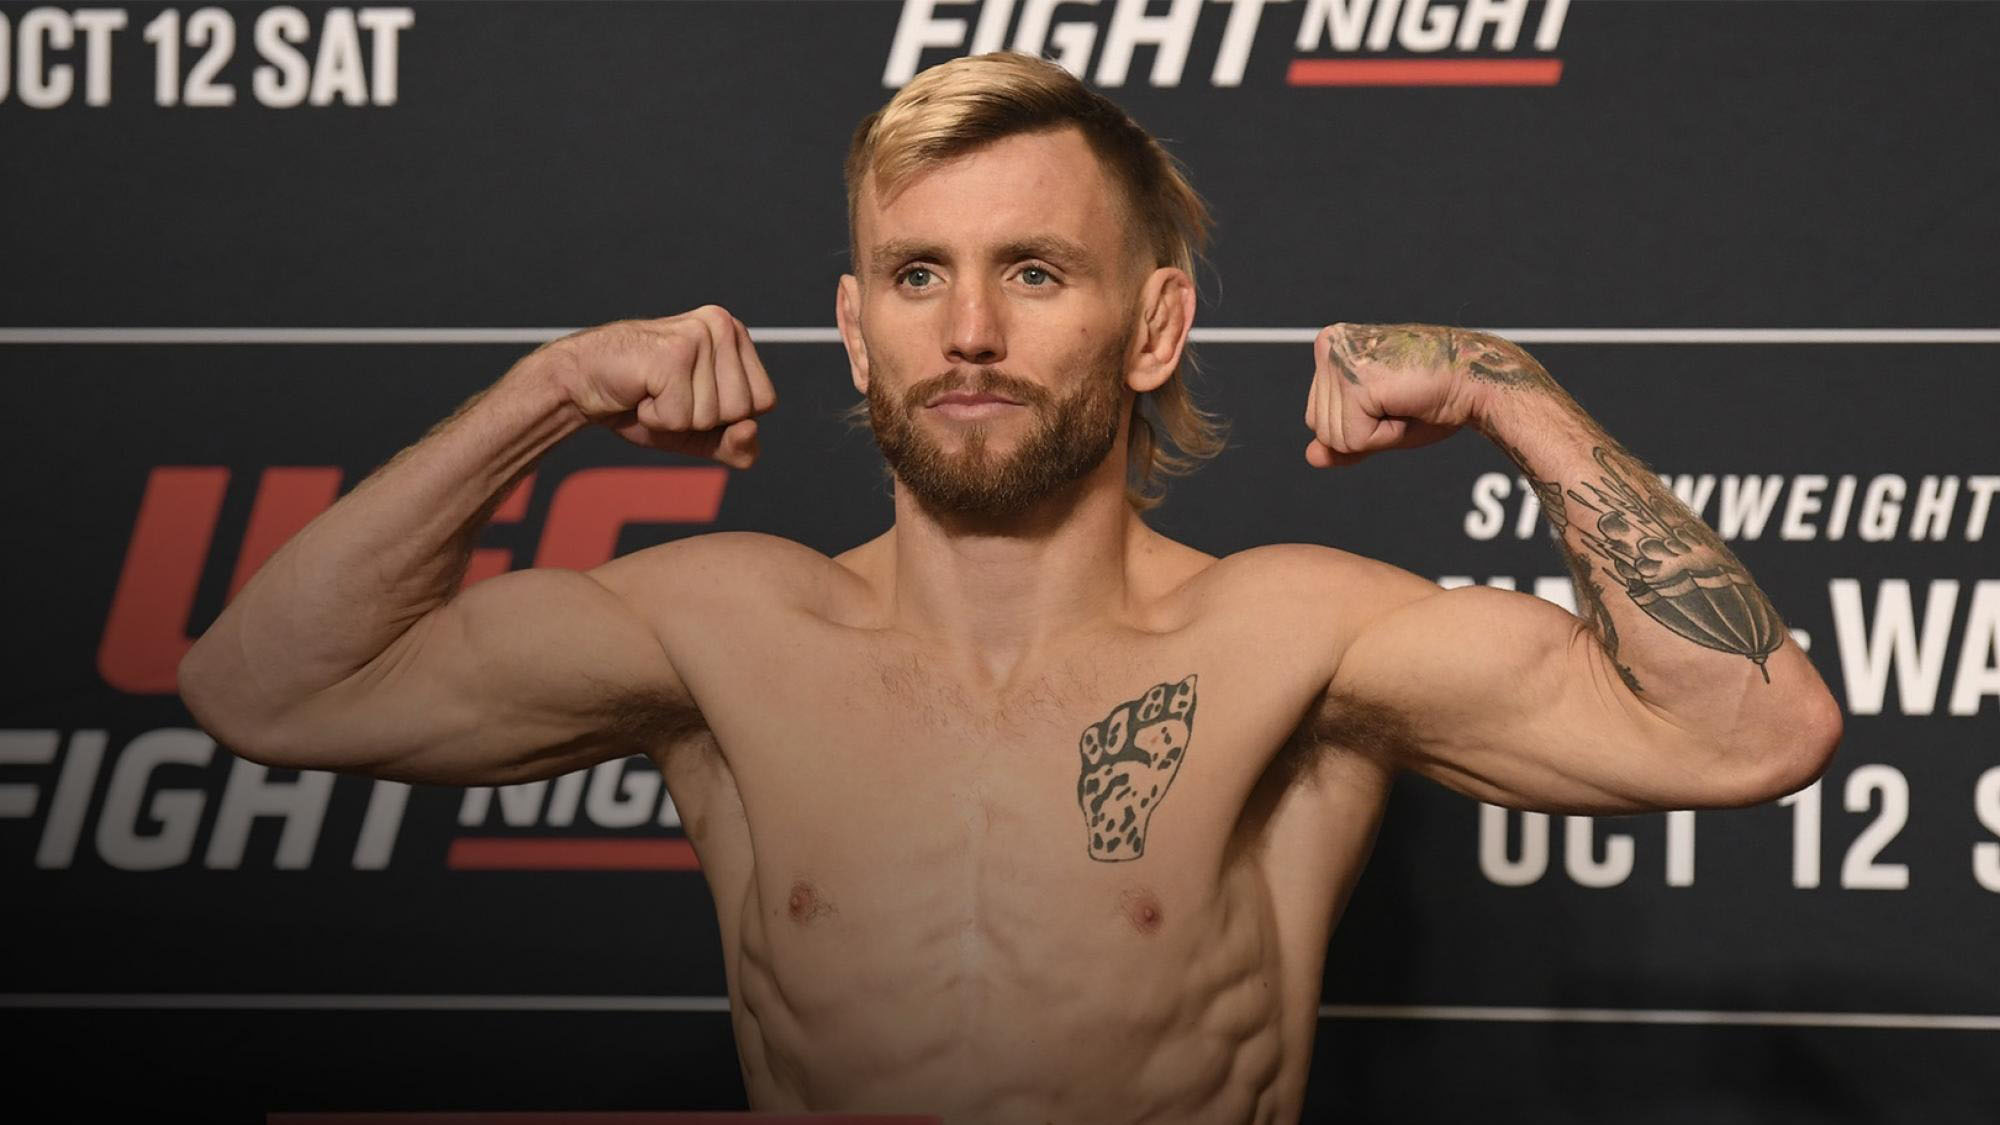 Timothy Samuel Elliott[8] (born December 24, 1986) is an American mixed martial artist who currently competes in the Flyweight division of the Ultimat...